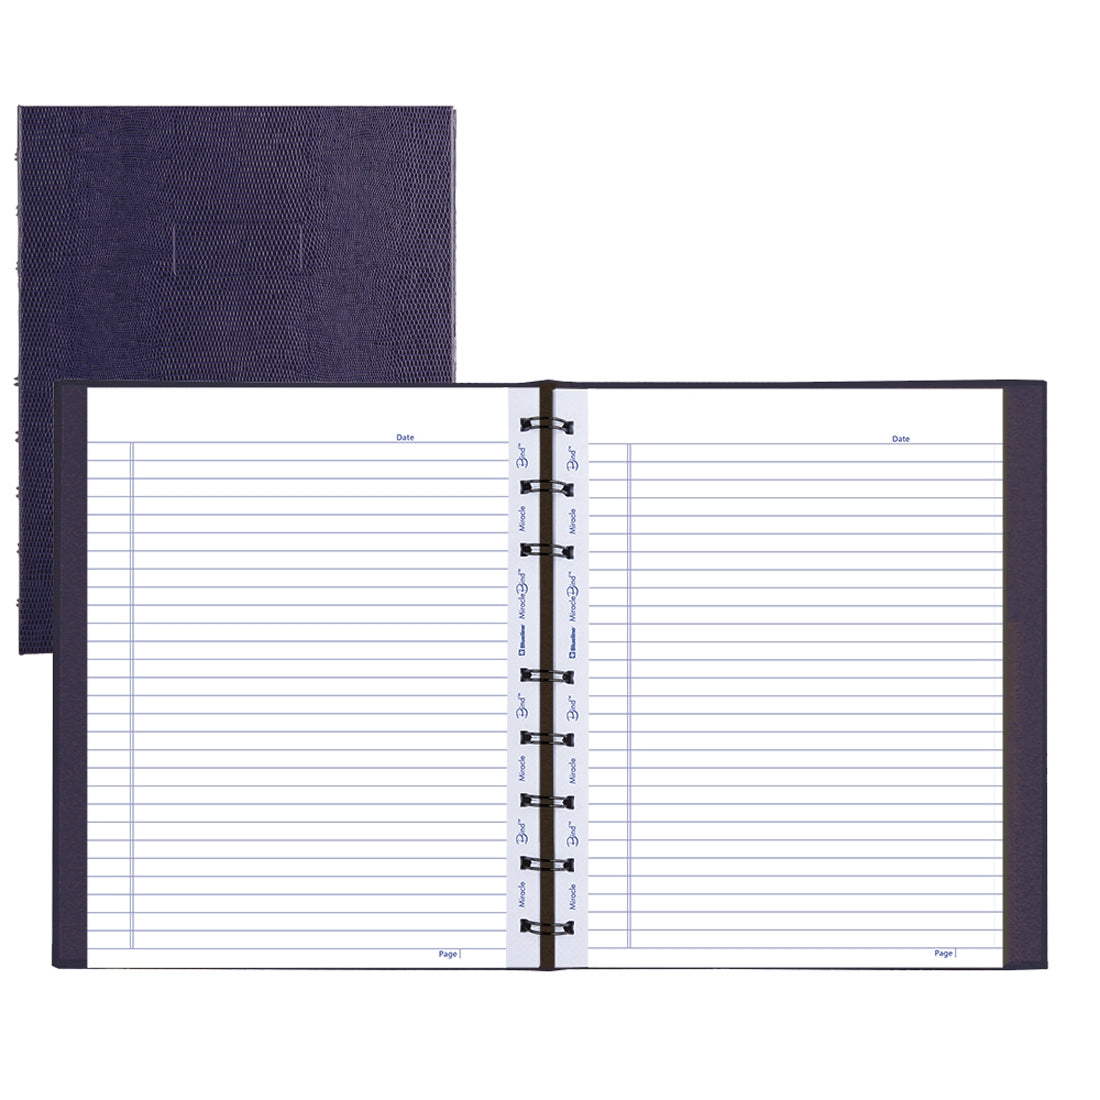 MiracleBind Notebook#colour_purple